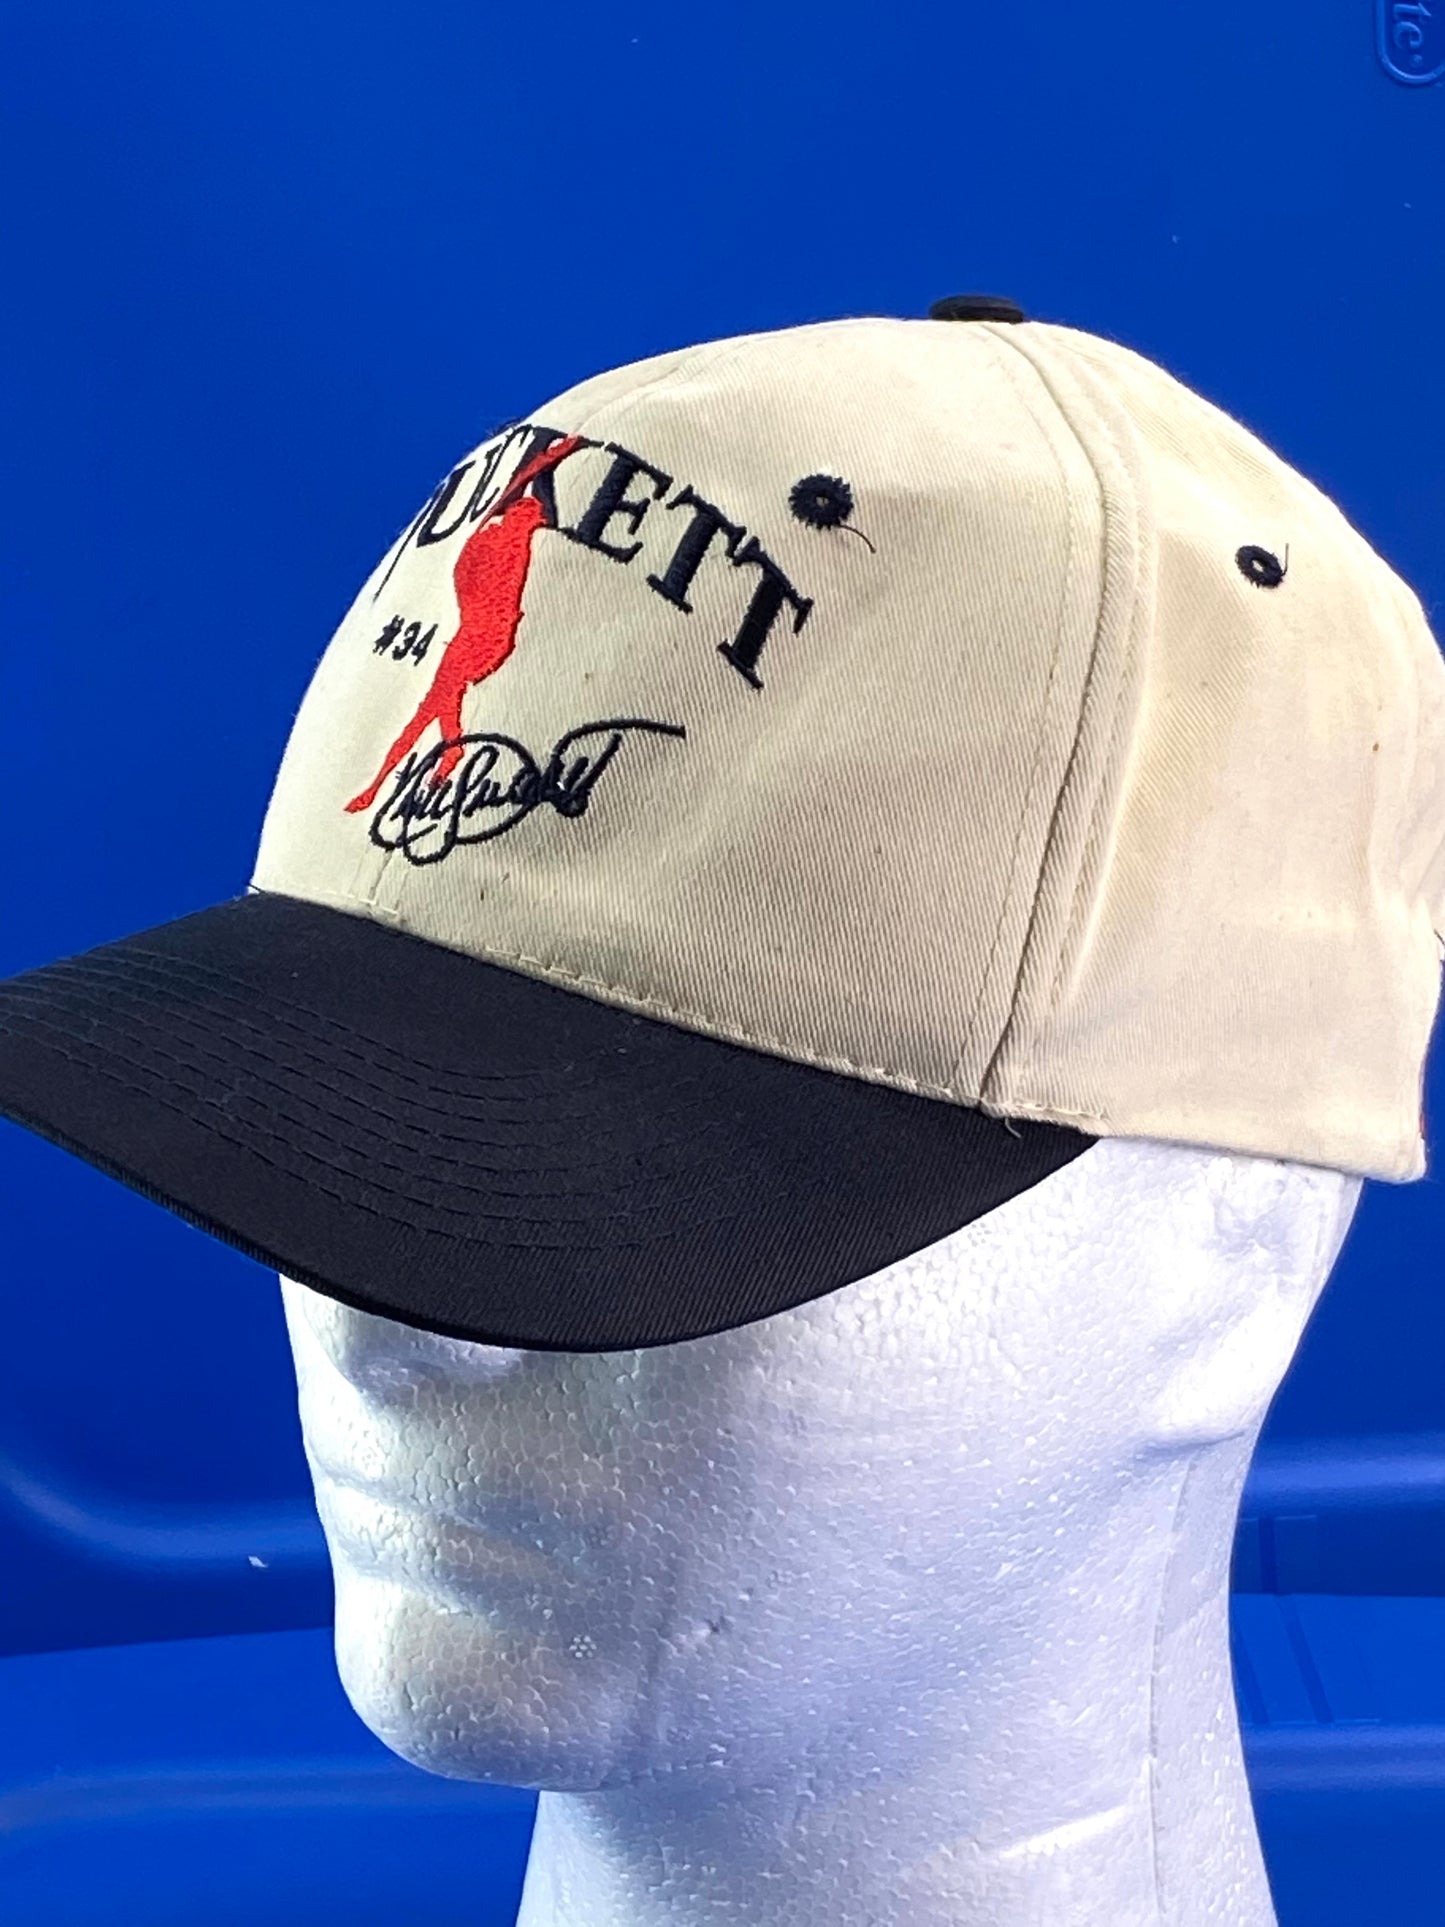 Kirby Puckett Minnesota Twins Vintage Late '80s NOS Dairy Queen Snapback by BD&A